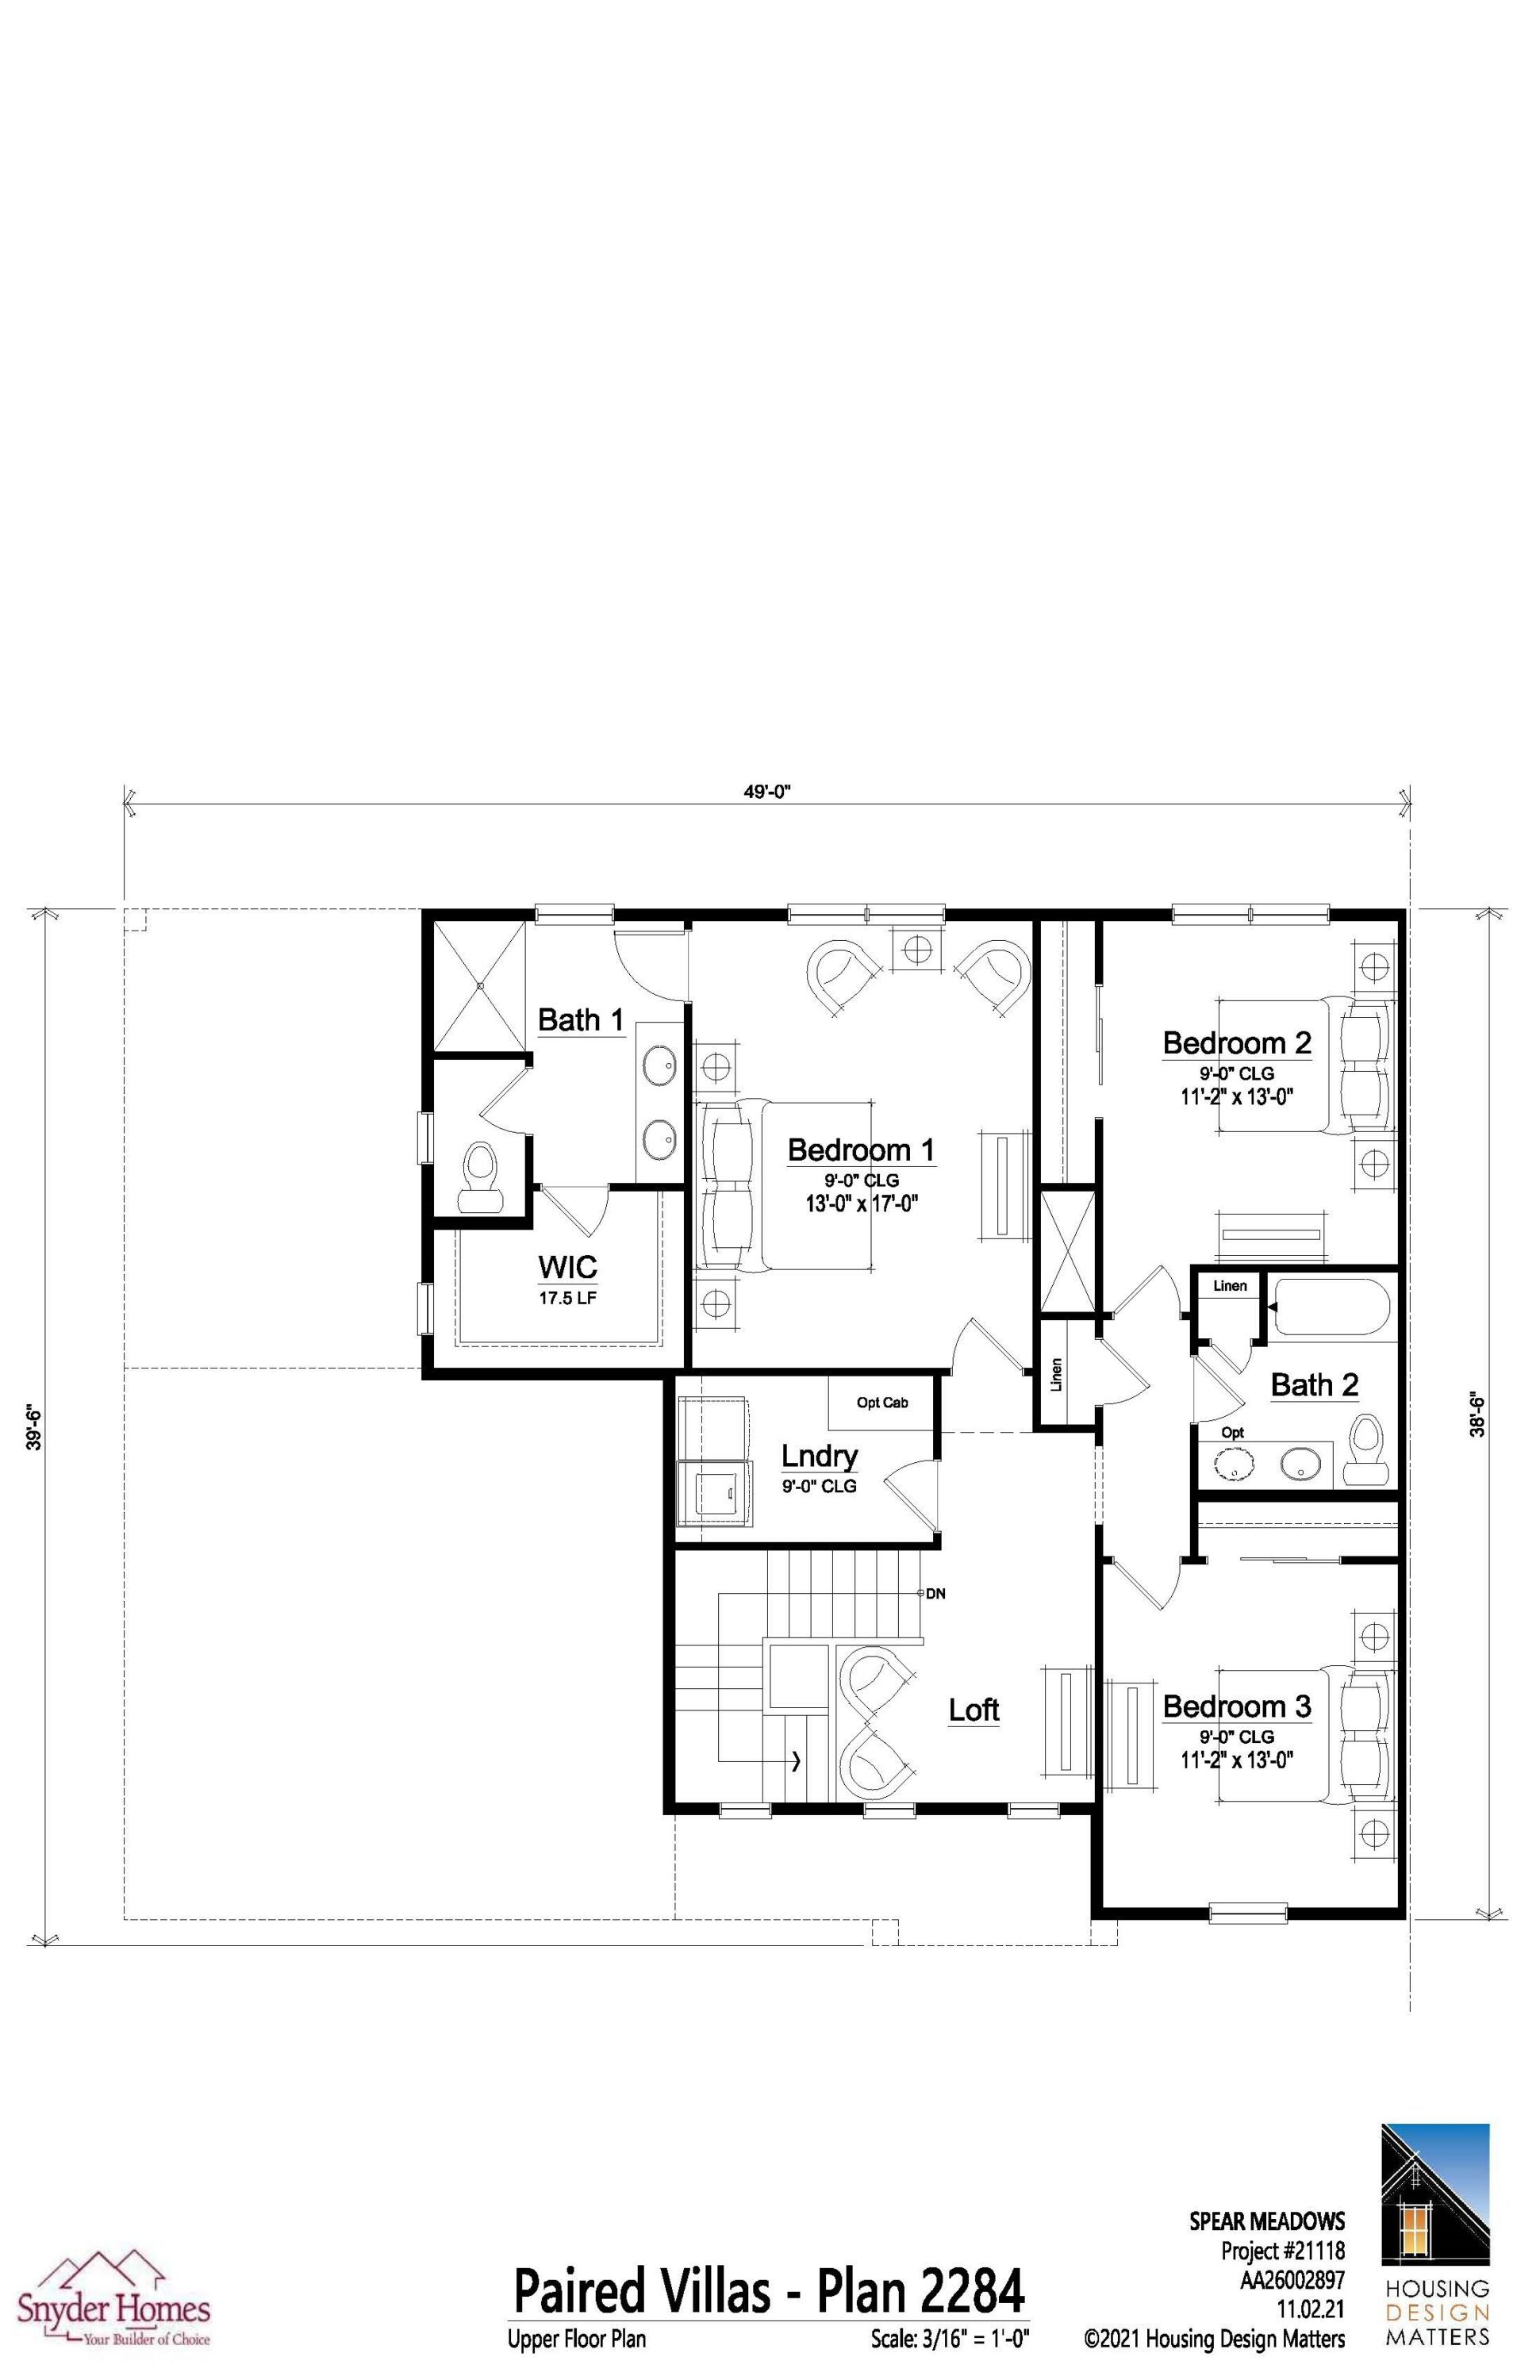 Blueprint of a two-story paired villa featuring three bedrooms, two bathrooms, a loft, laundry, and a walk-in closet in the main bedroom.